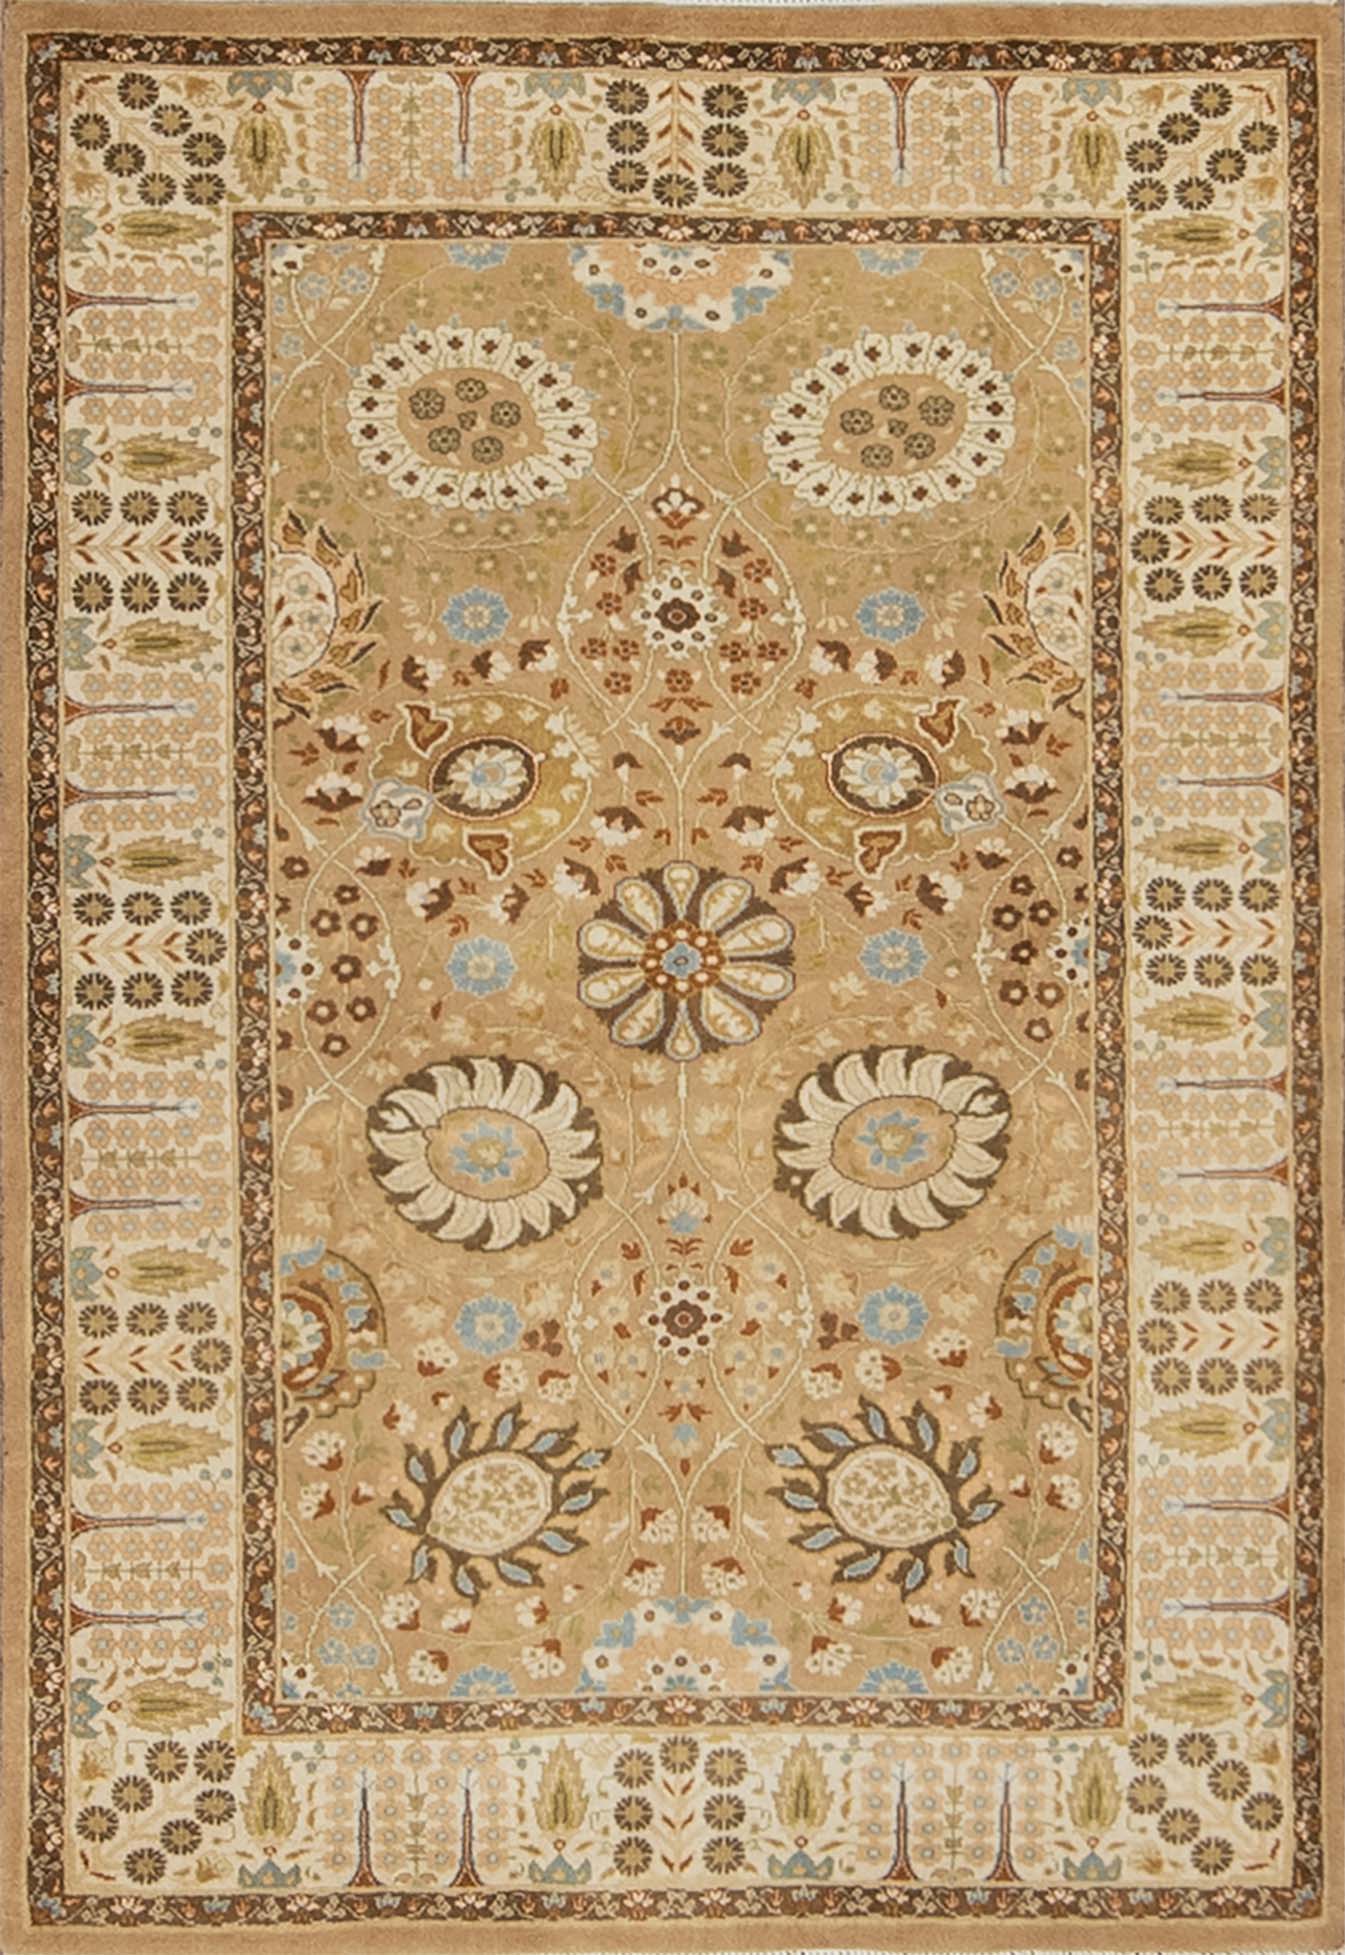 Beige oriental rug in floral Persian Tabriz style made of wool. Size 3.3x5.3.